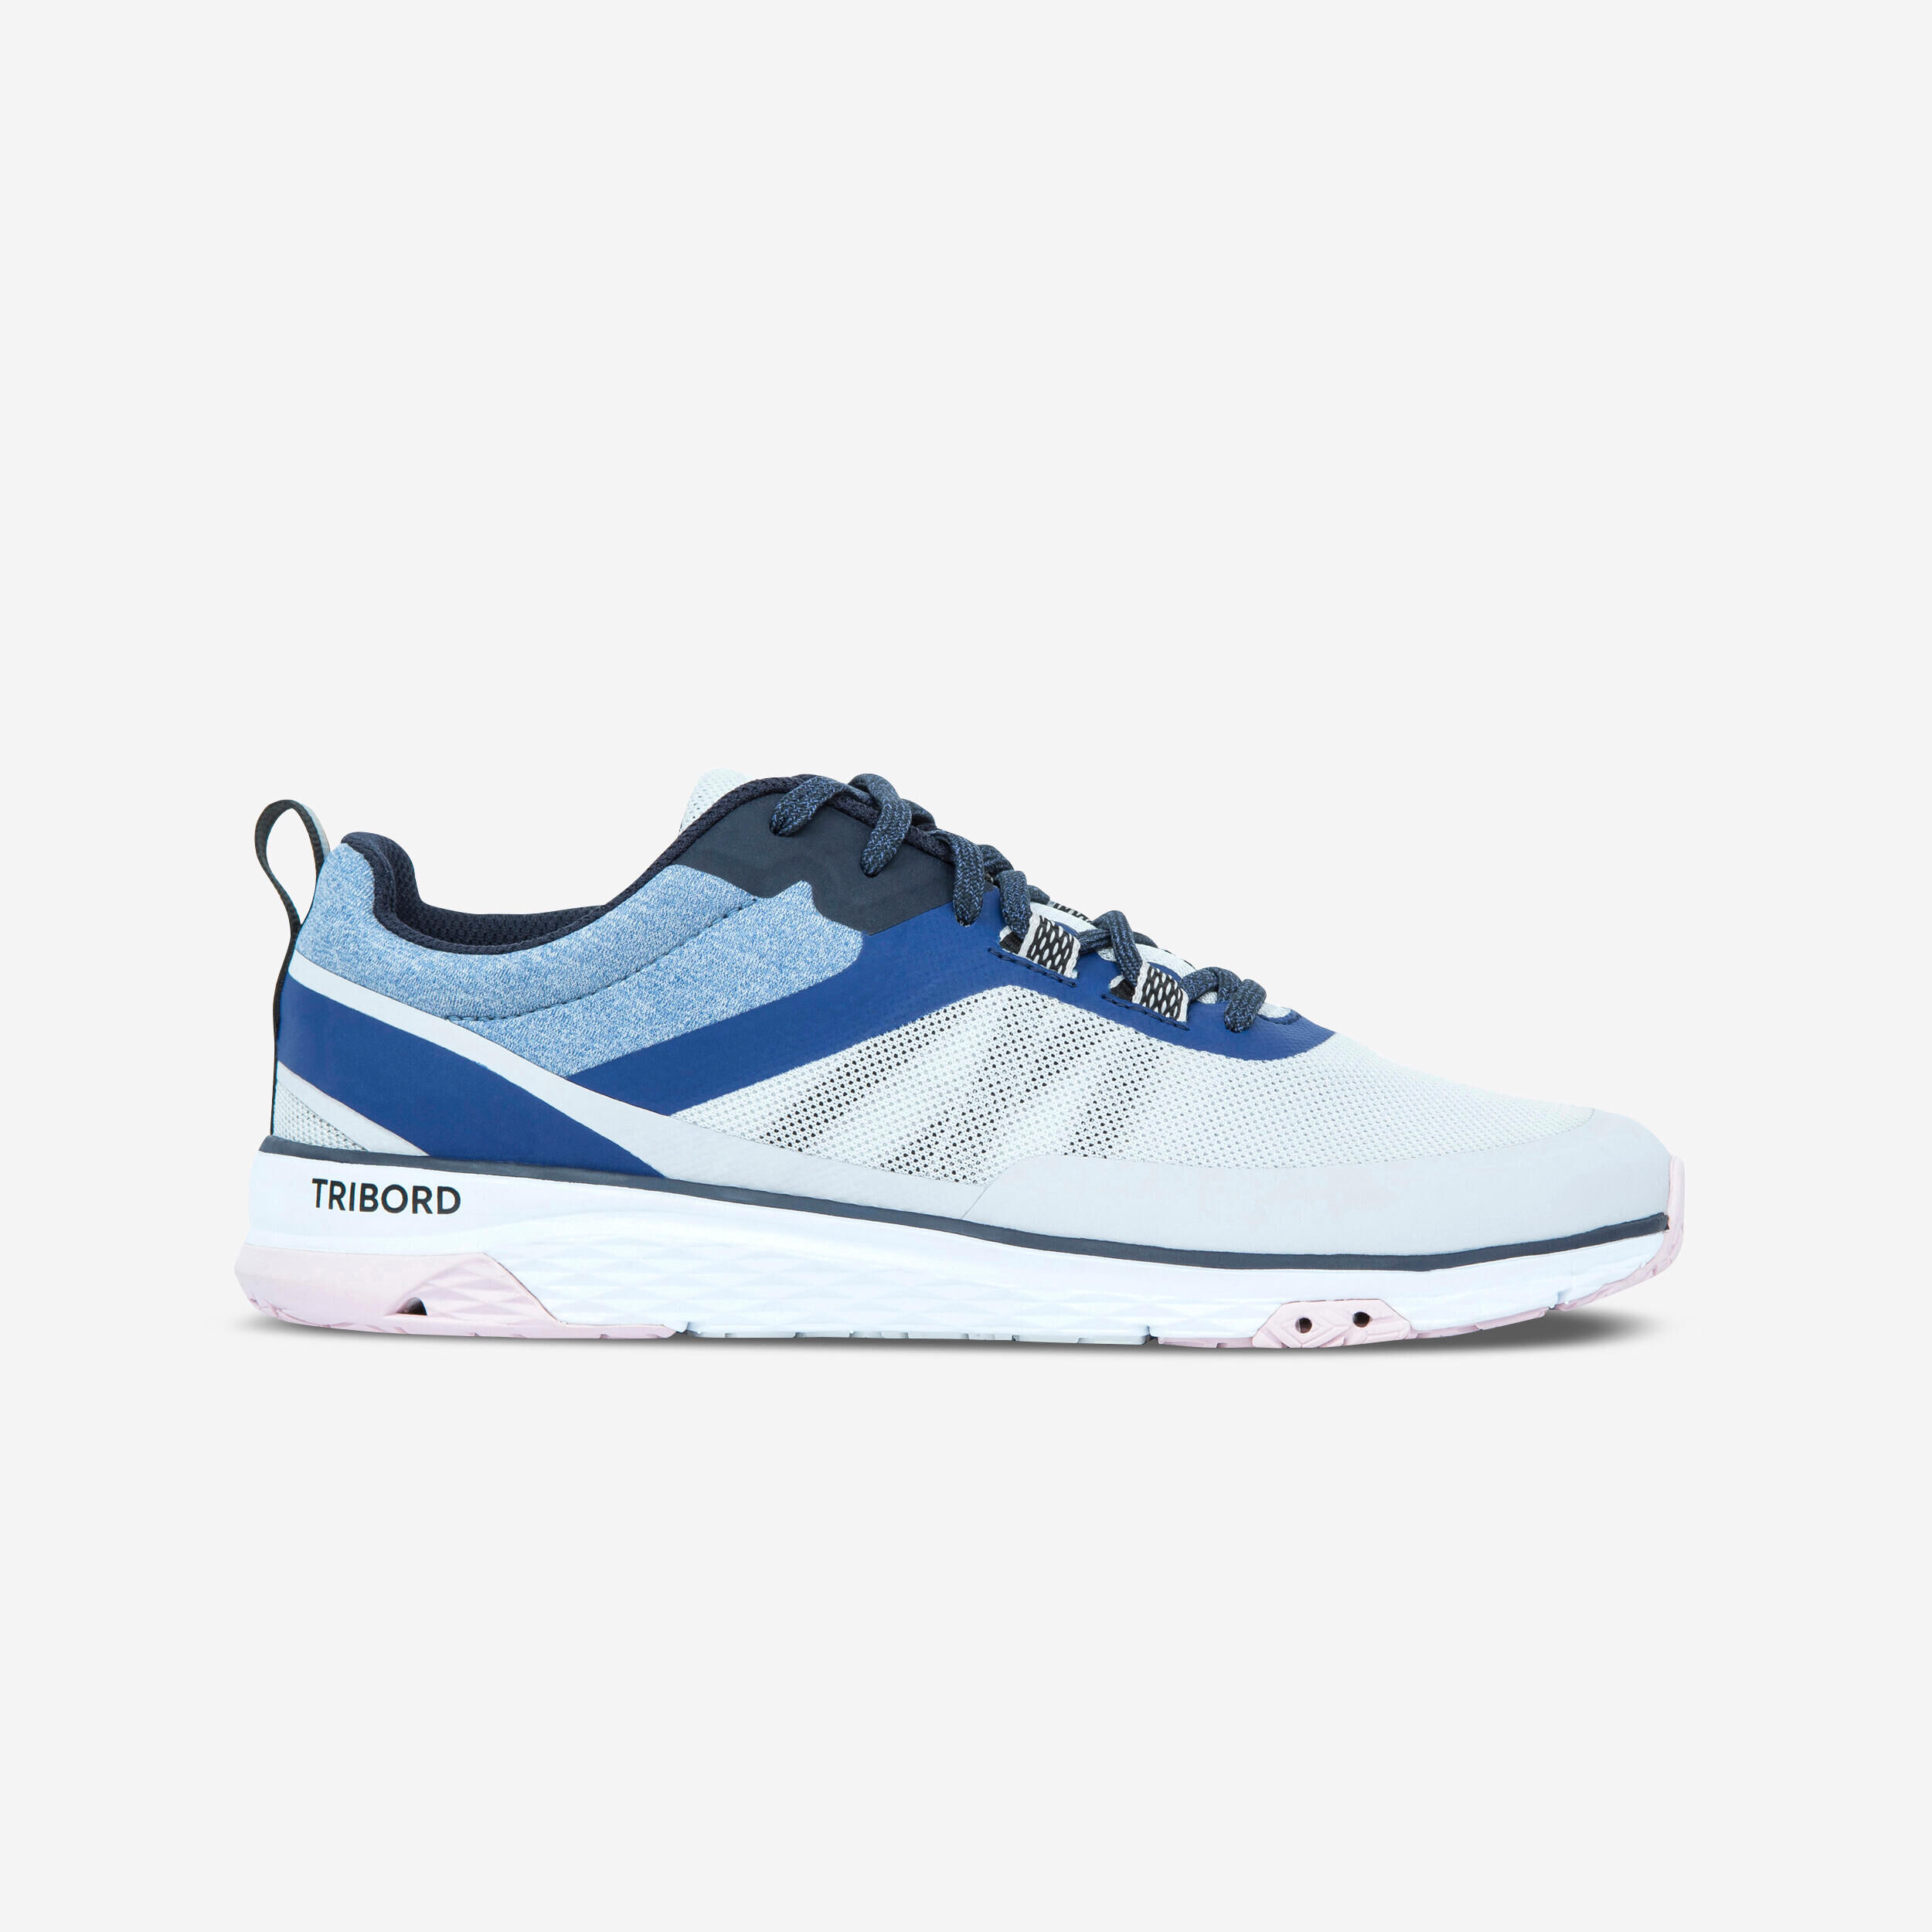 TRIBORD Women’s Sailing Boat Trainers Race 500 - Blue